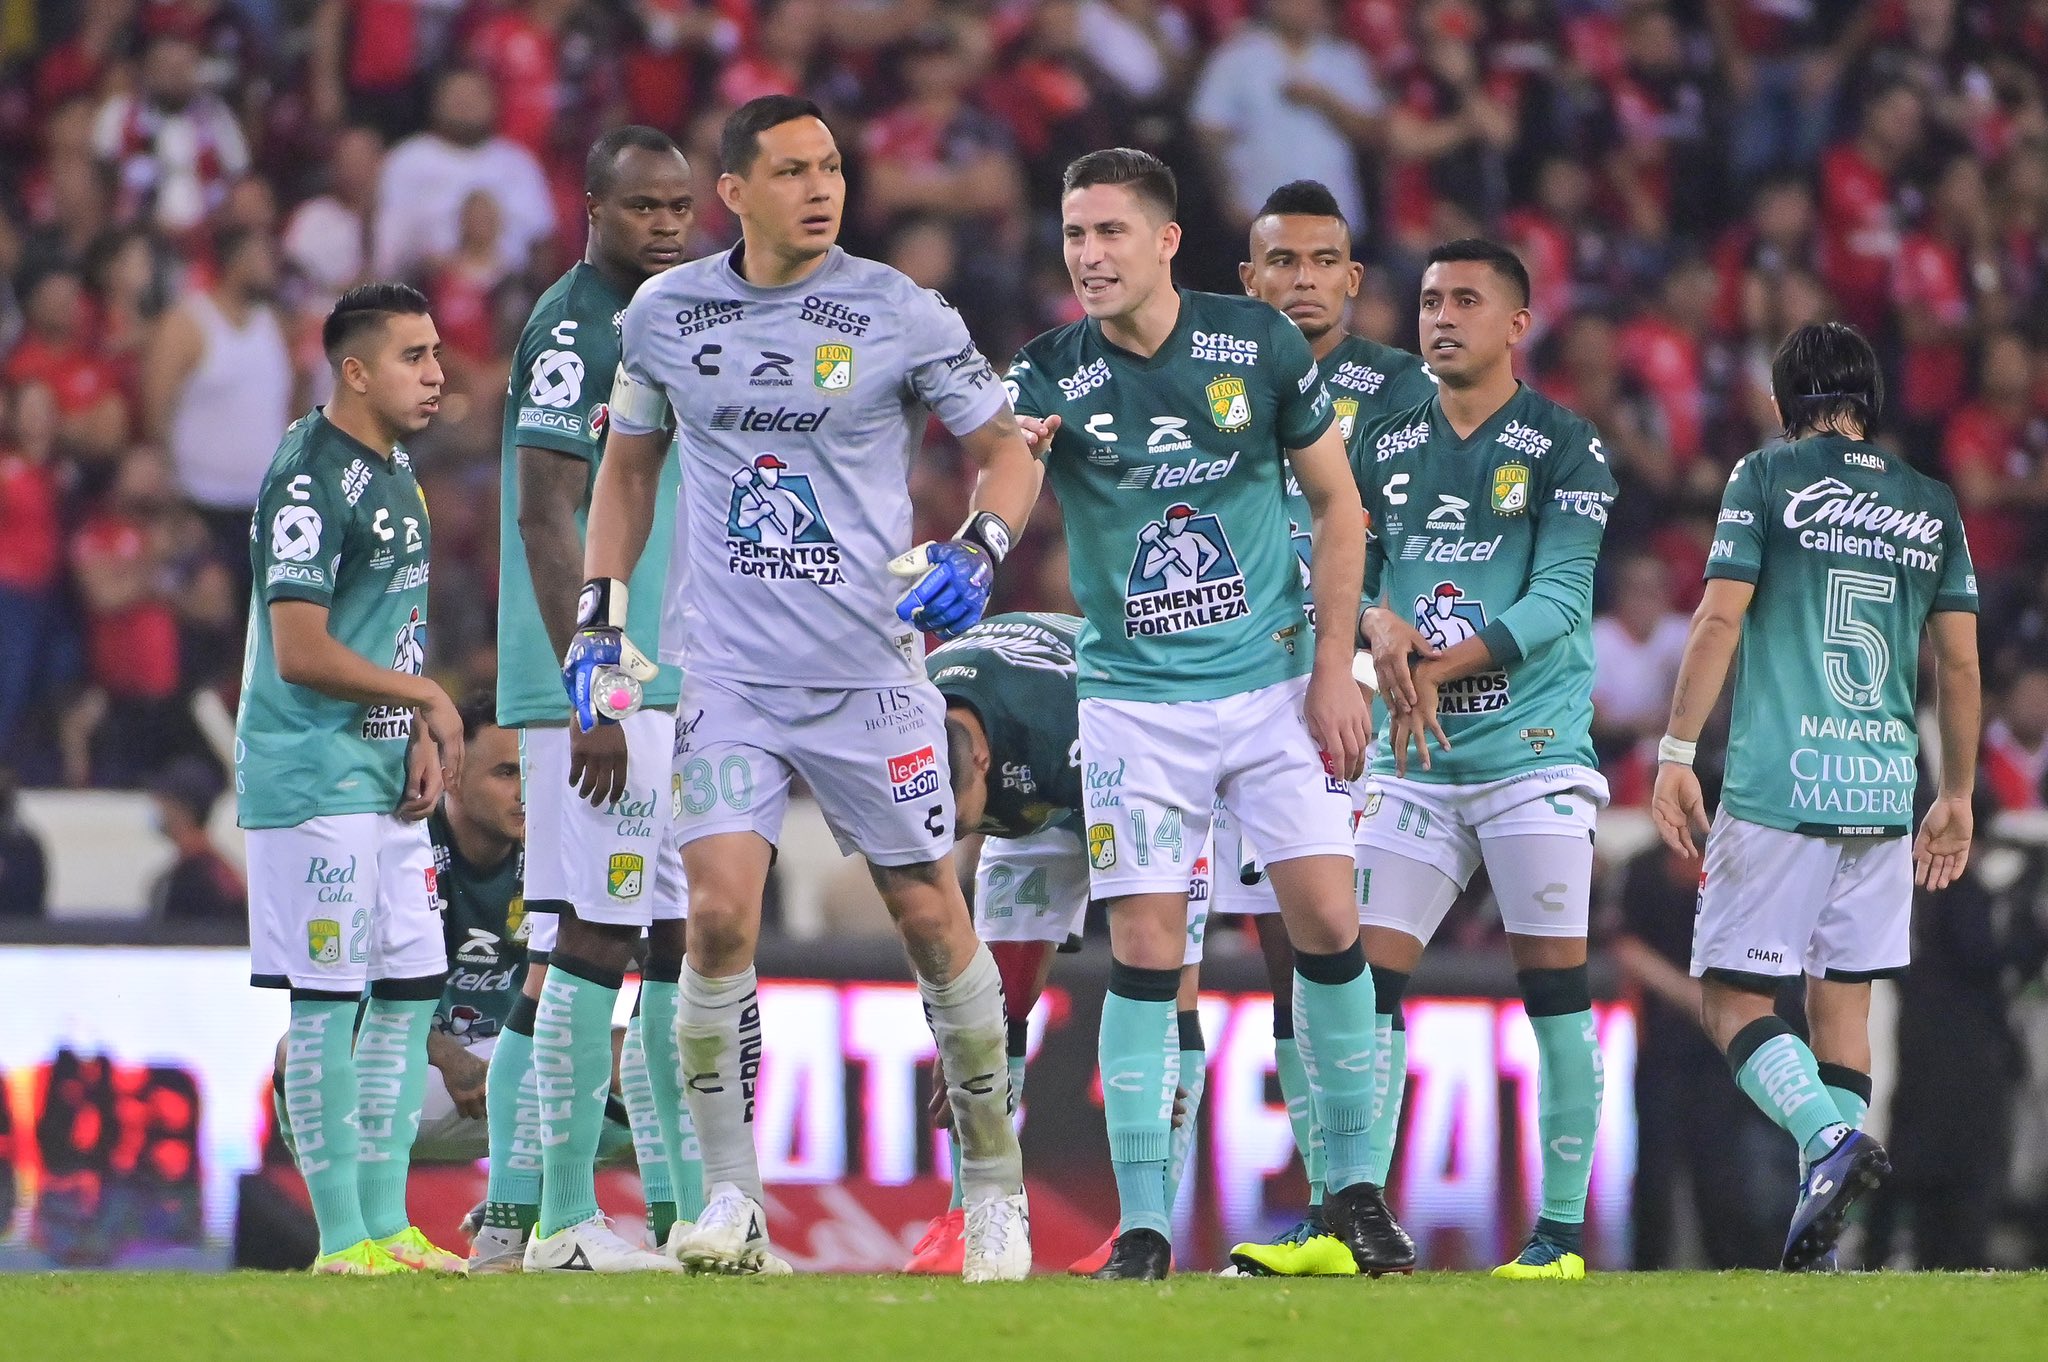 Club Leon aiming for new heights in SCCL in 2022